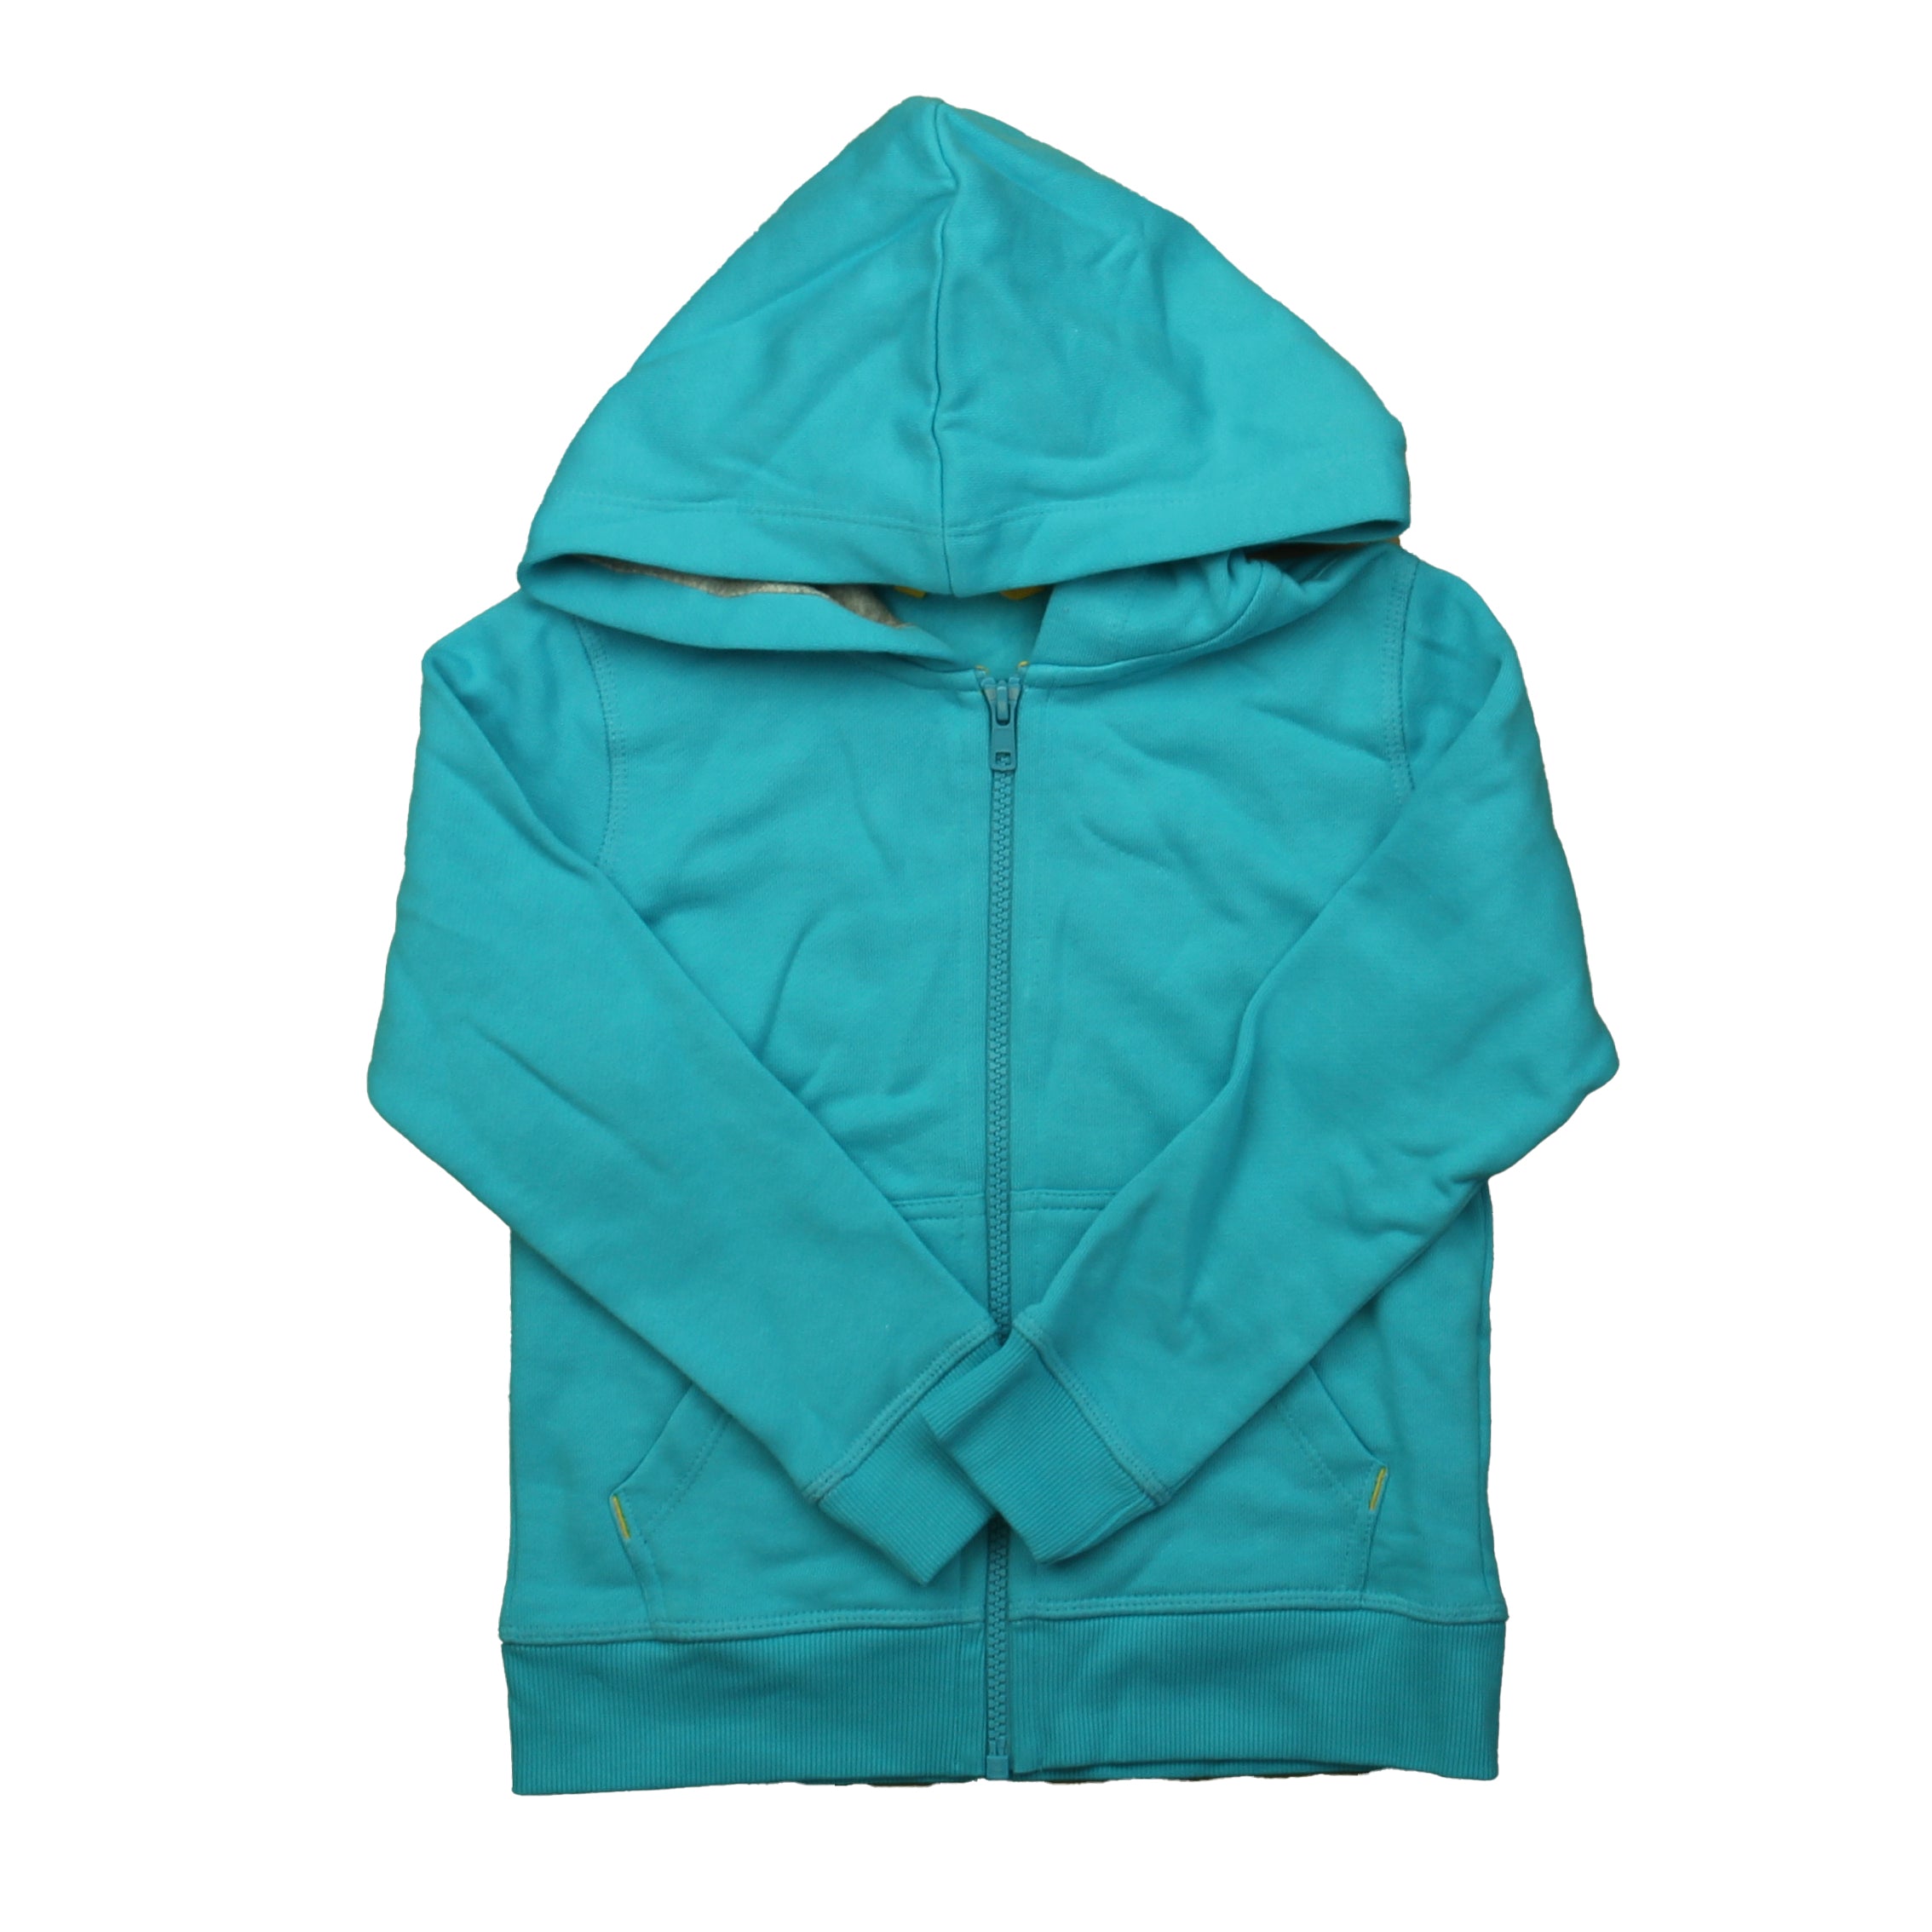 Pre-owned Turquoise Sweatshirt size: 4T